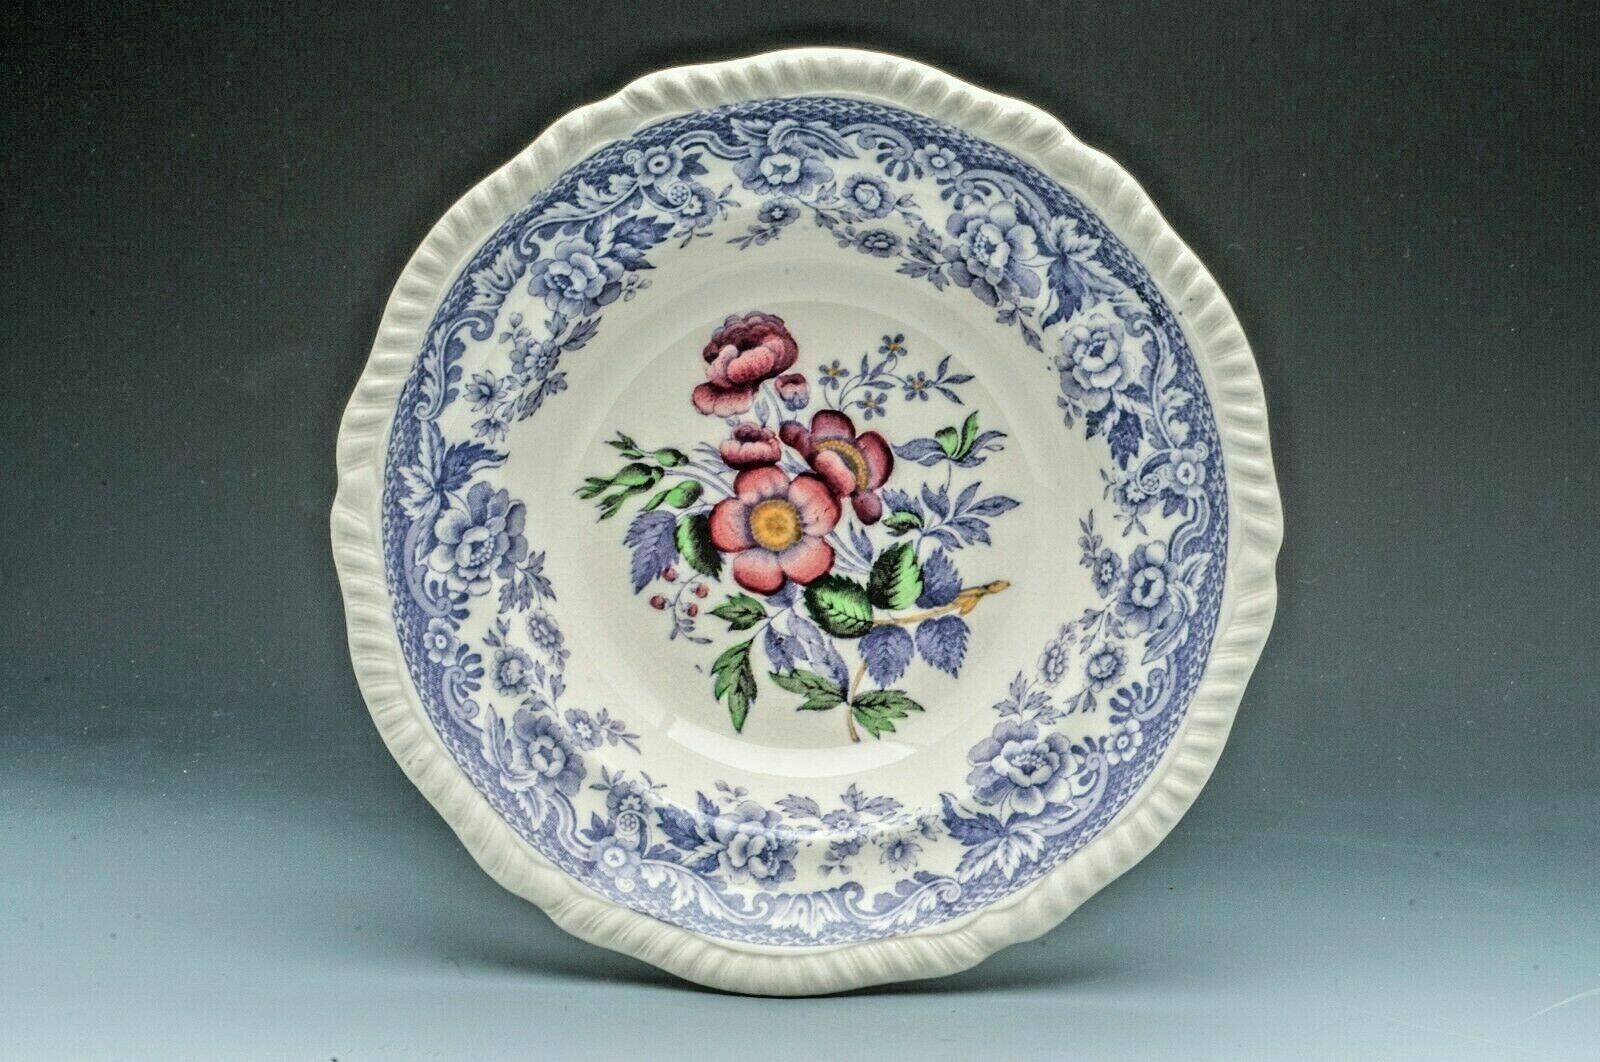 Mayflower By Spode China Rim Soup Bowl 7.75", Gently Used